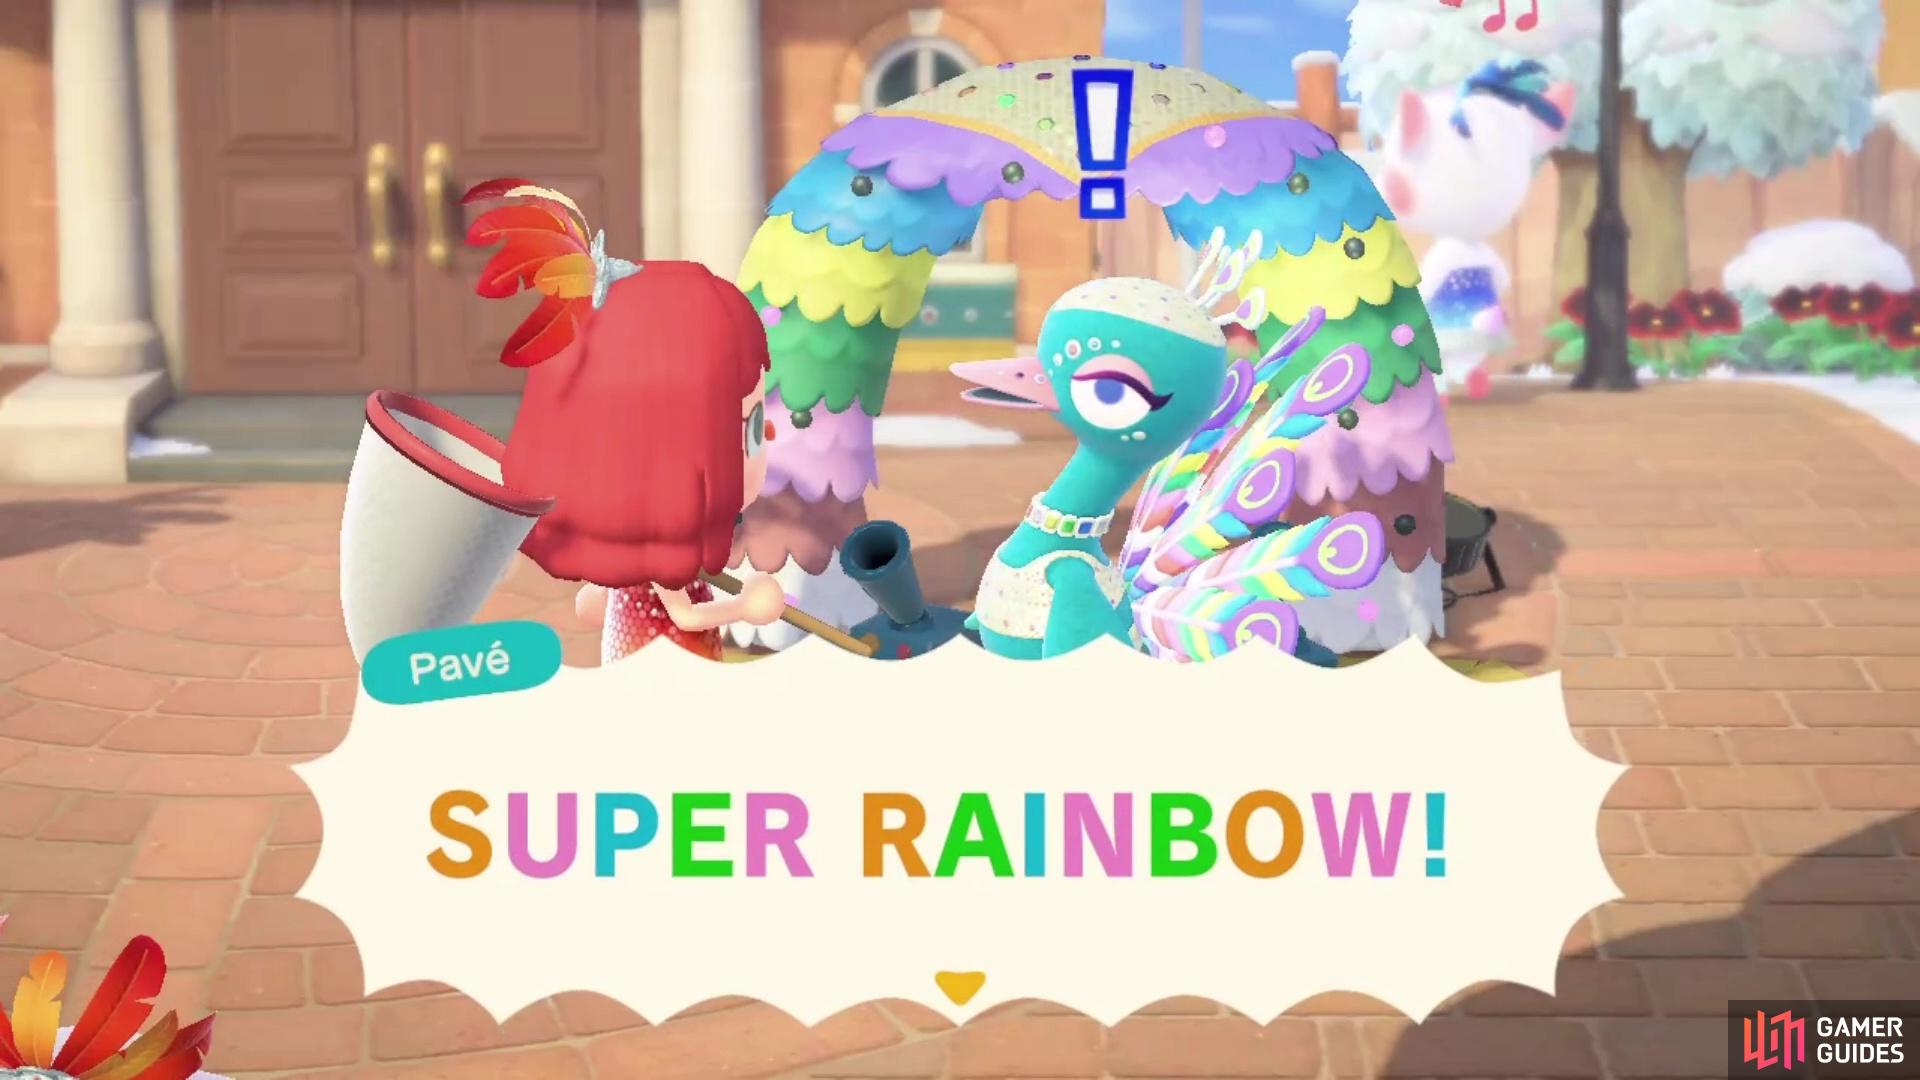 The rainbow feathers make Pavé quite excited.